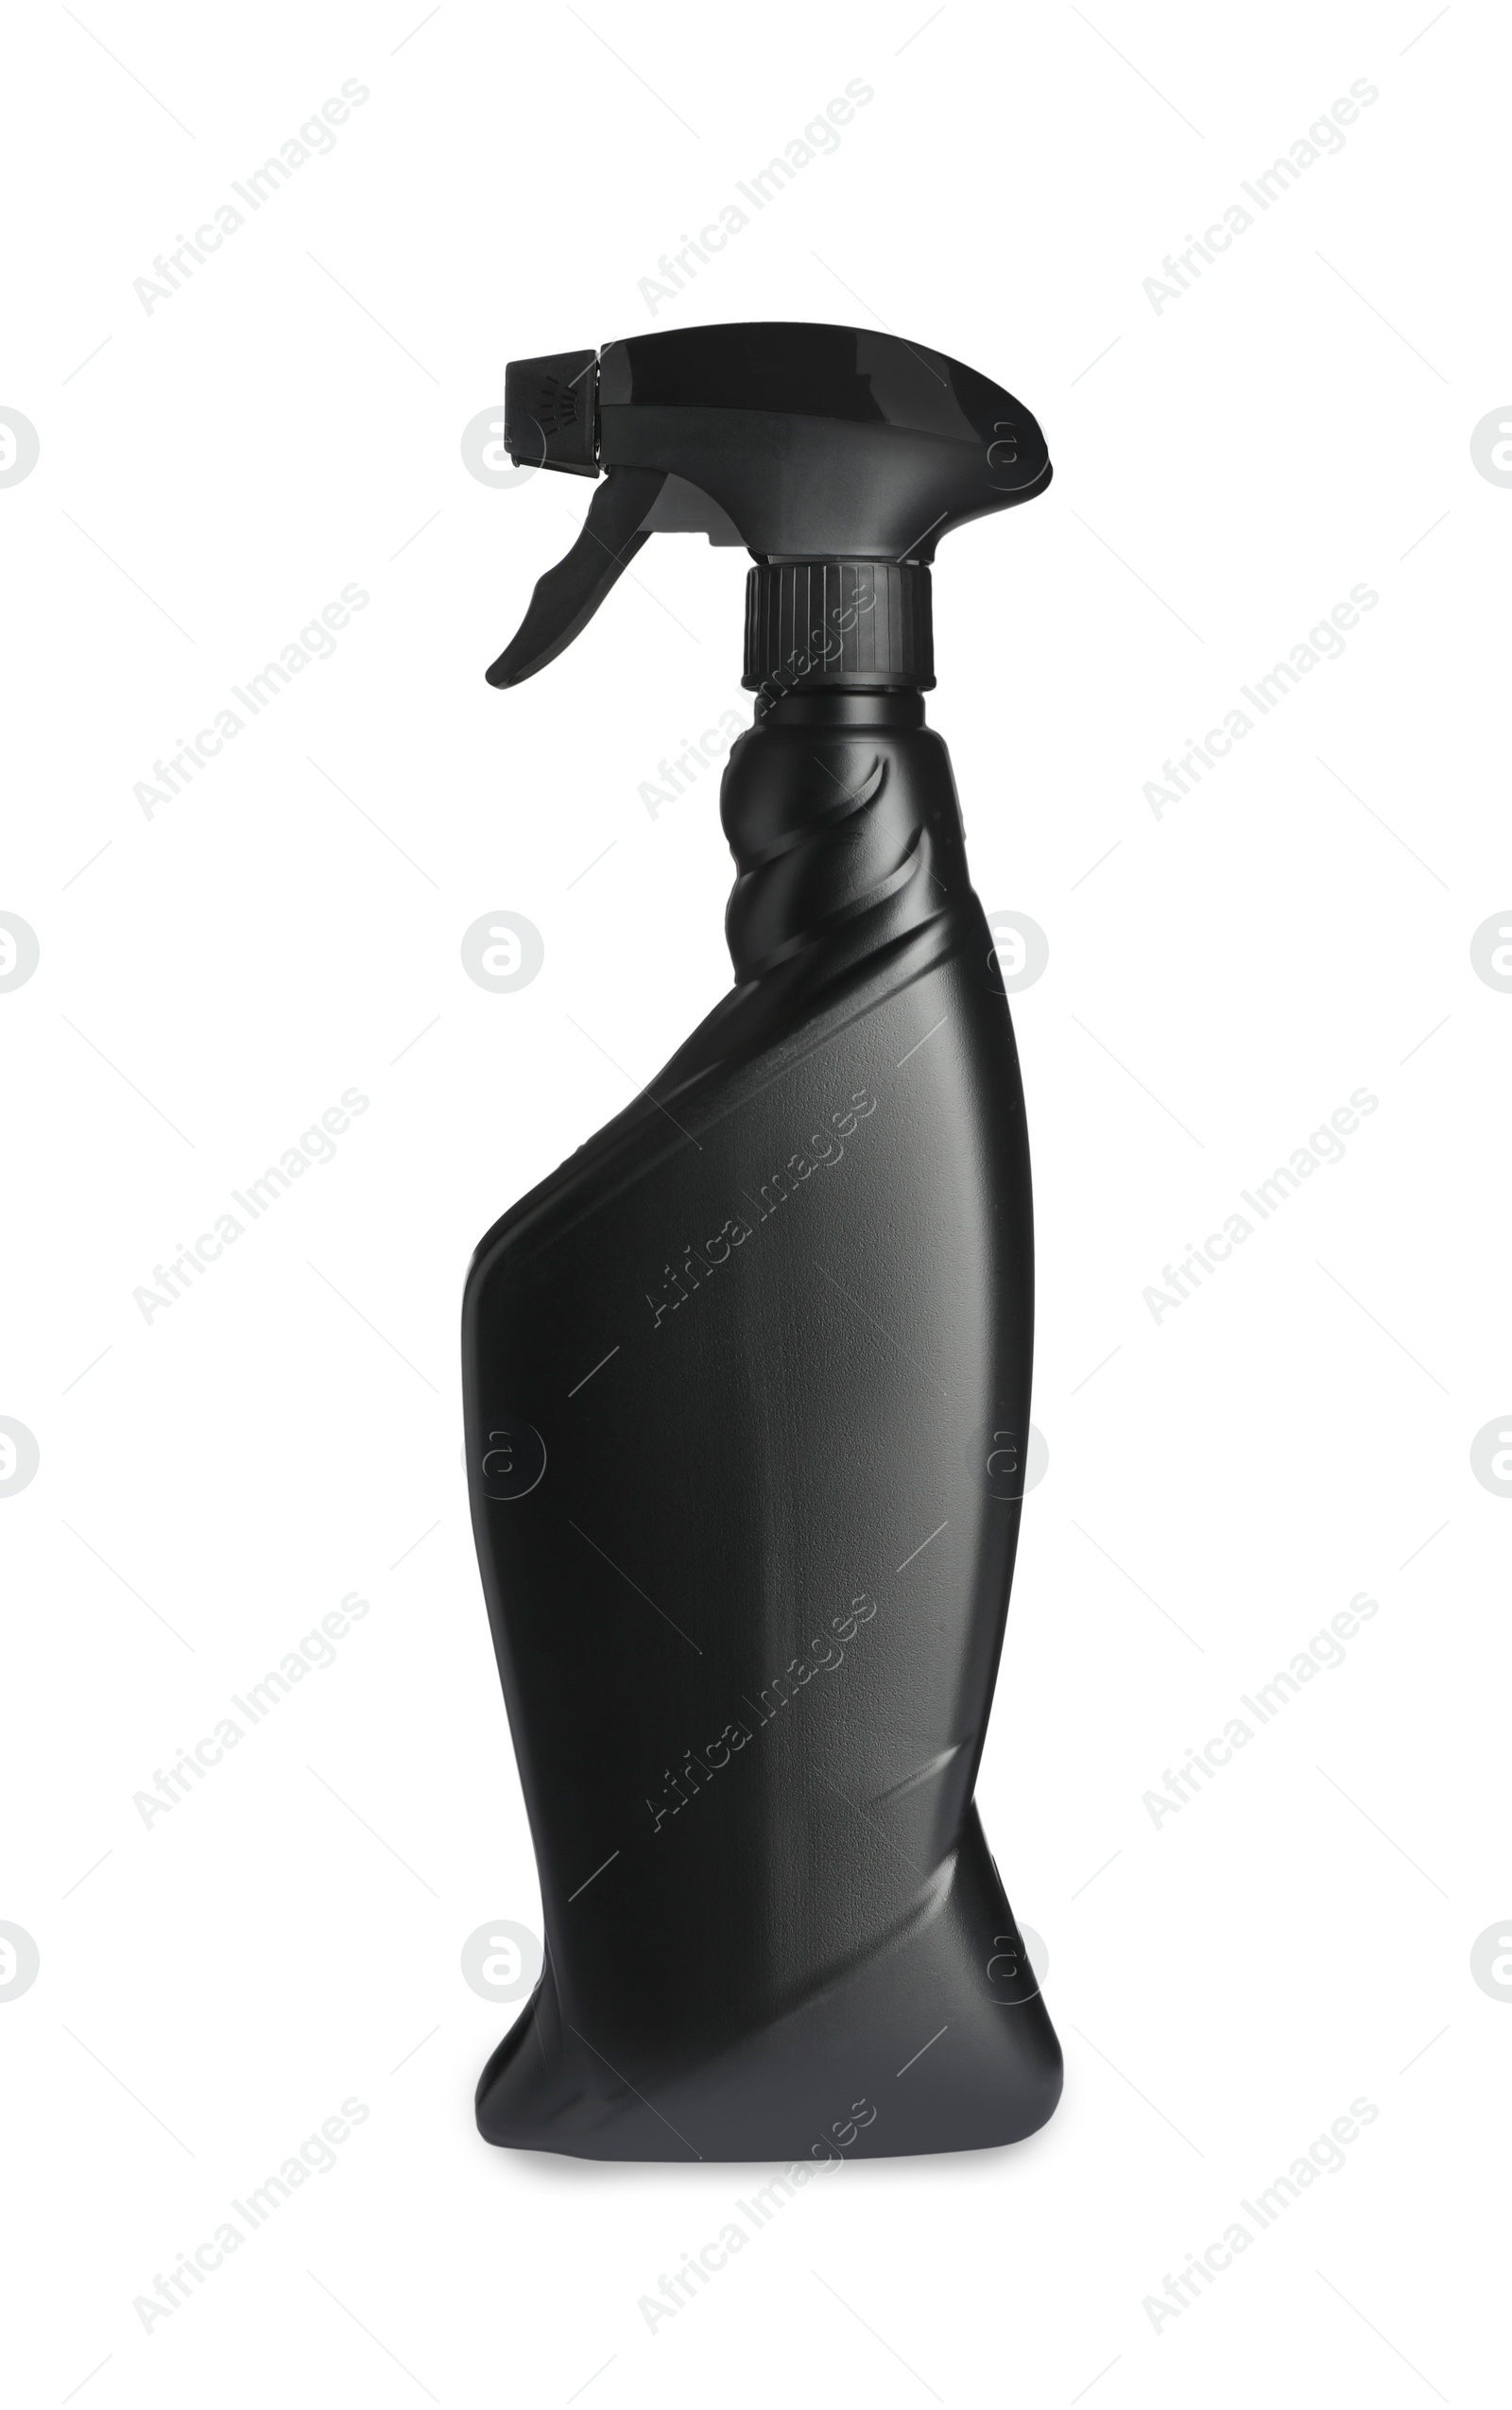 Photo of Blank black spray bottle of car product isolated on white